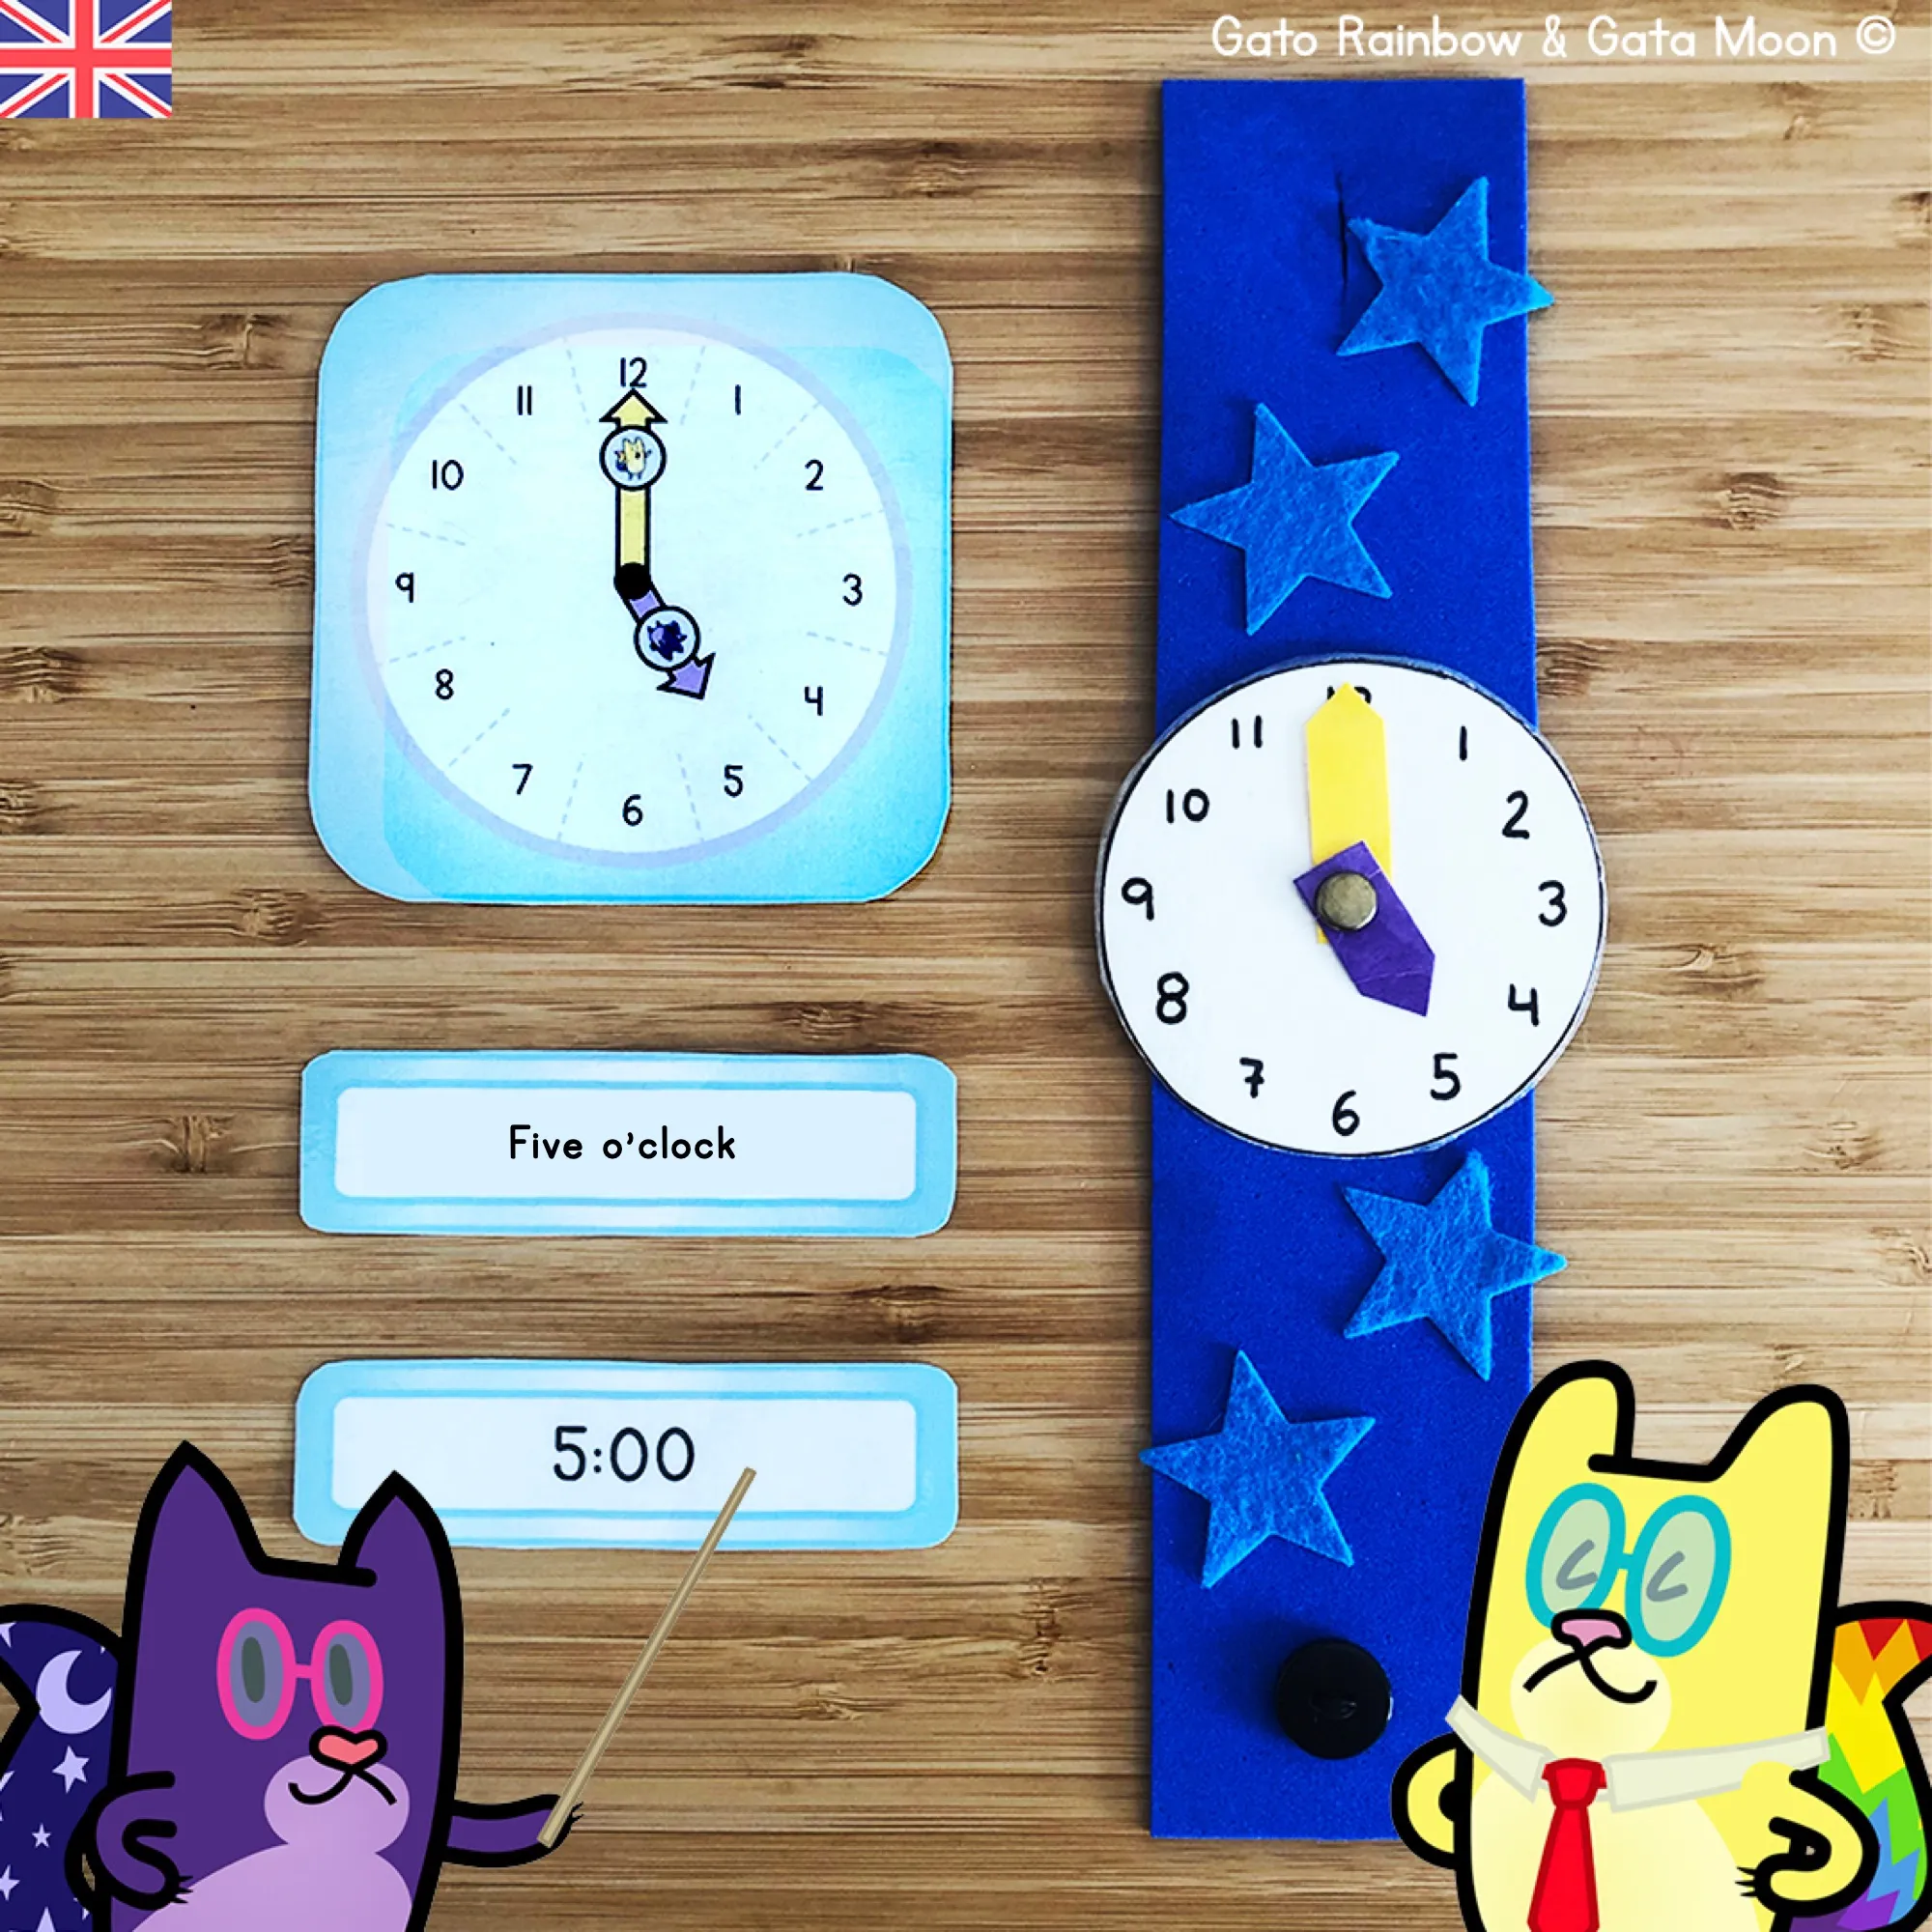 Telling Time - CLOCK and CARDS to teach how to tell time (Digital and Analogue)